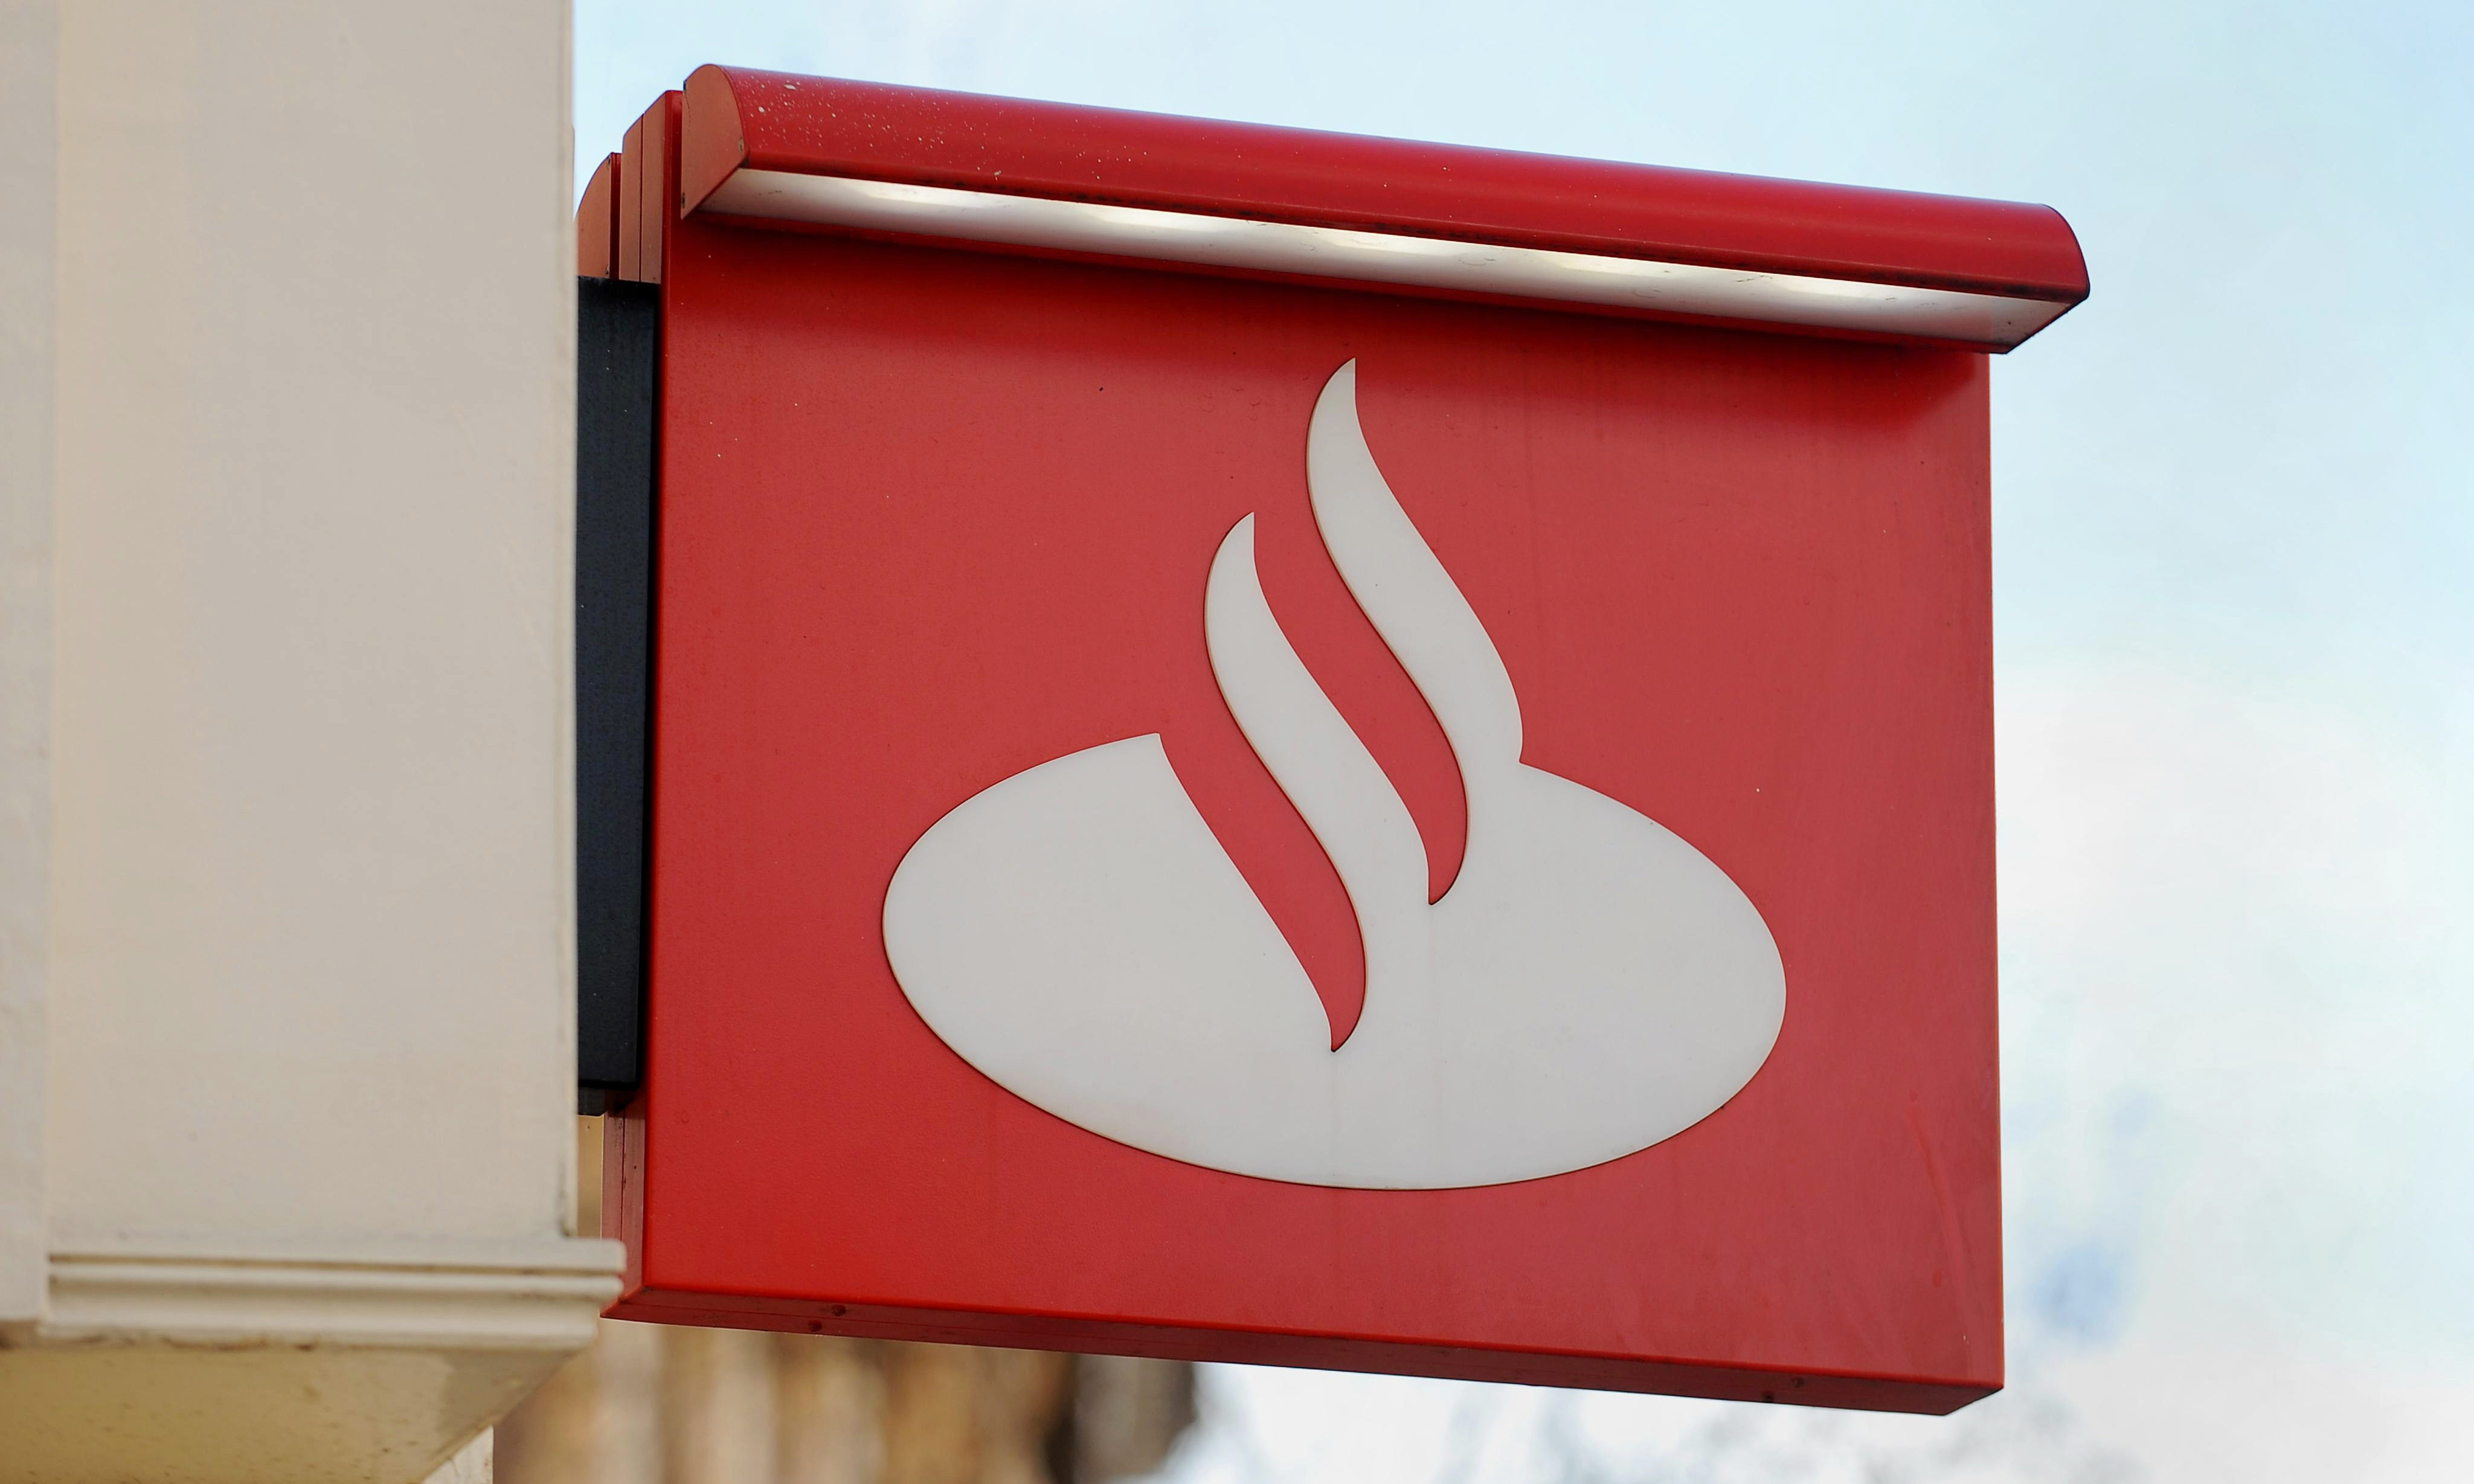 Santander is closing branches in Brechin and Forfar